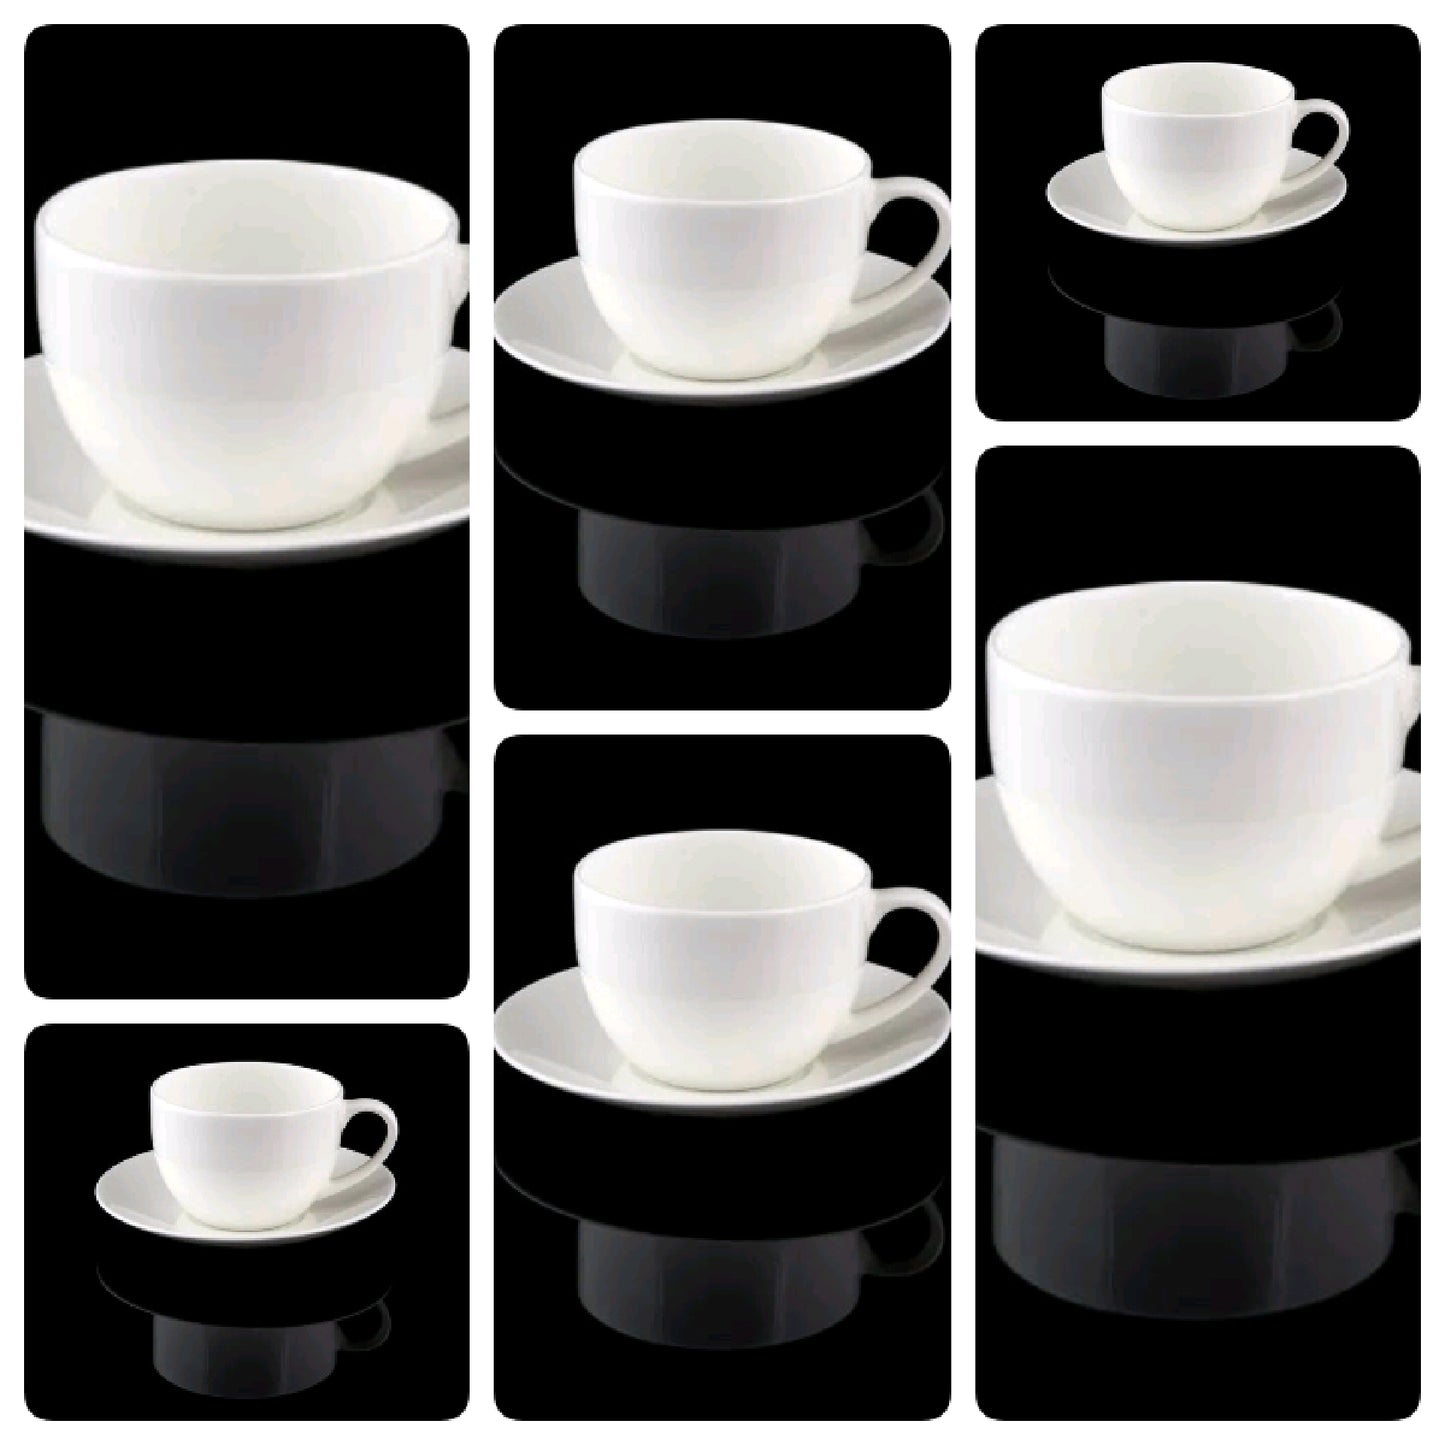 Cup saucer set - White